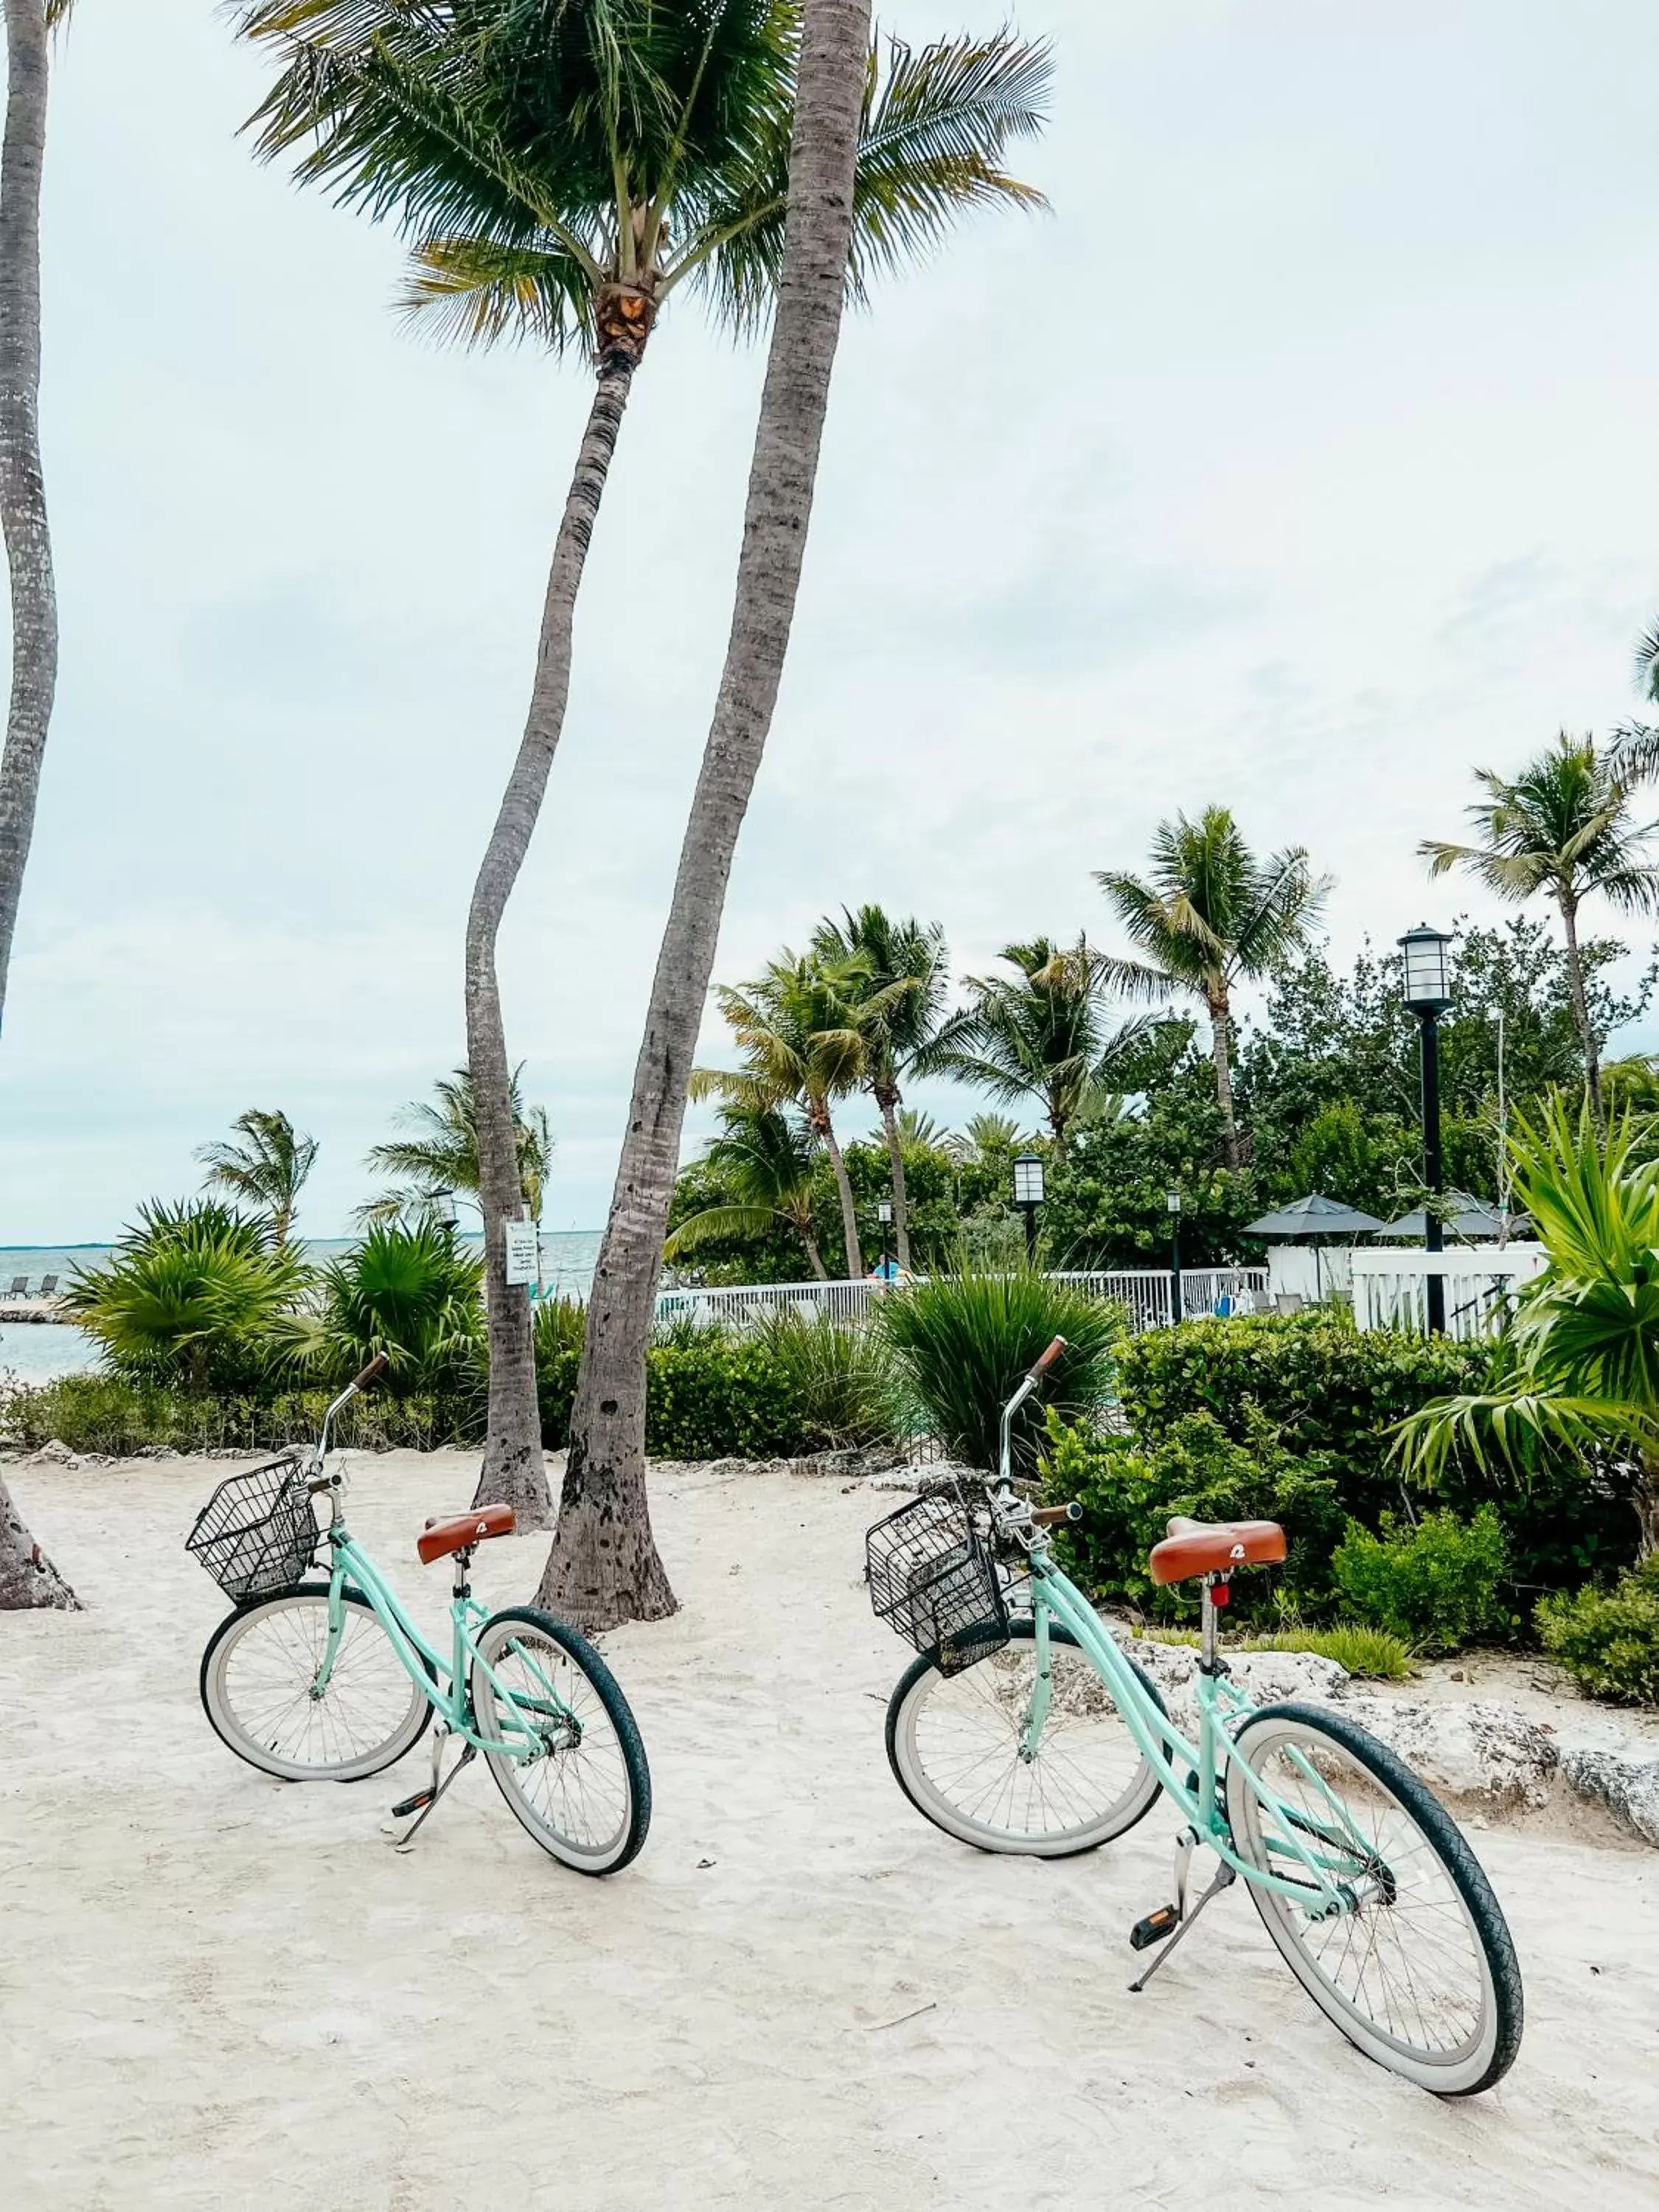 Cycling, Other Activities in Bayside Inn Key Largo